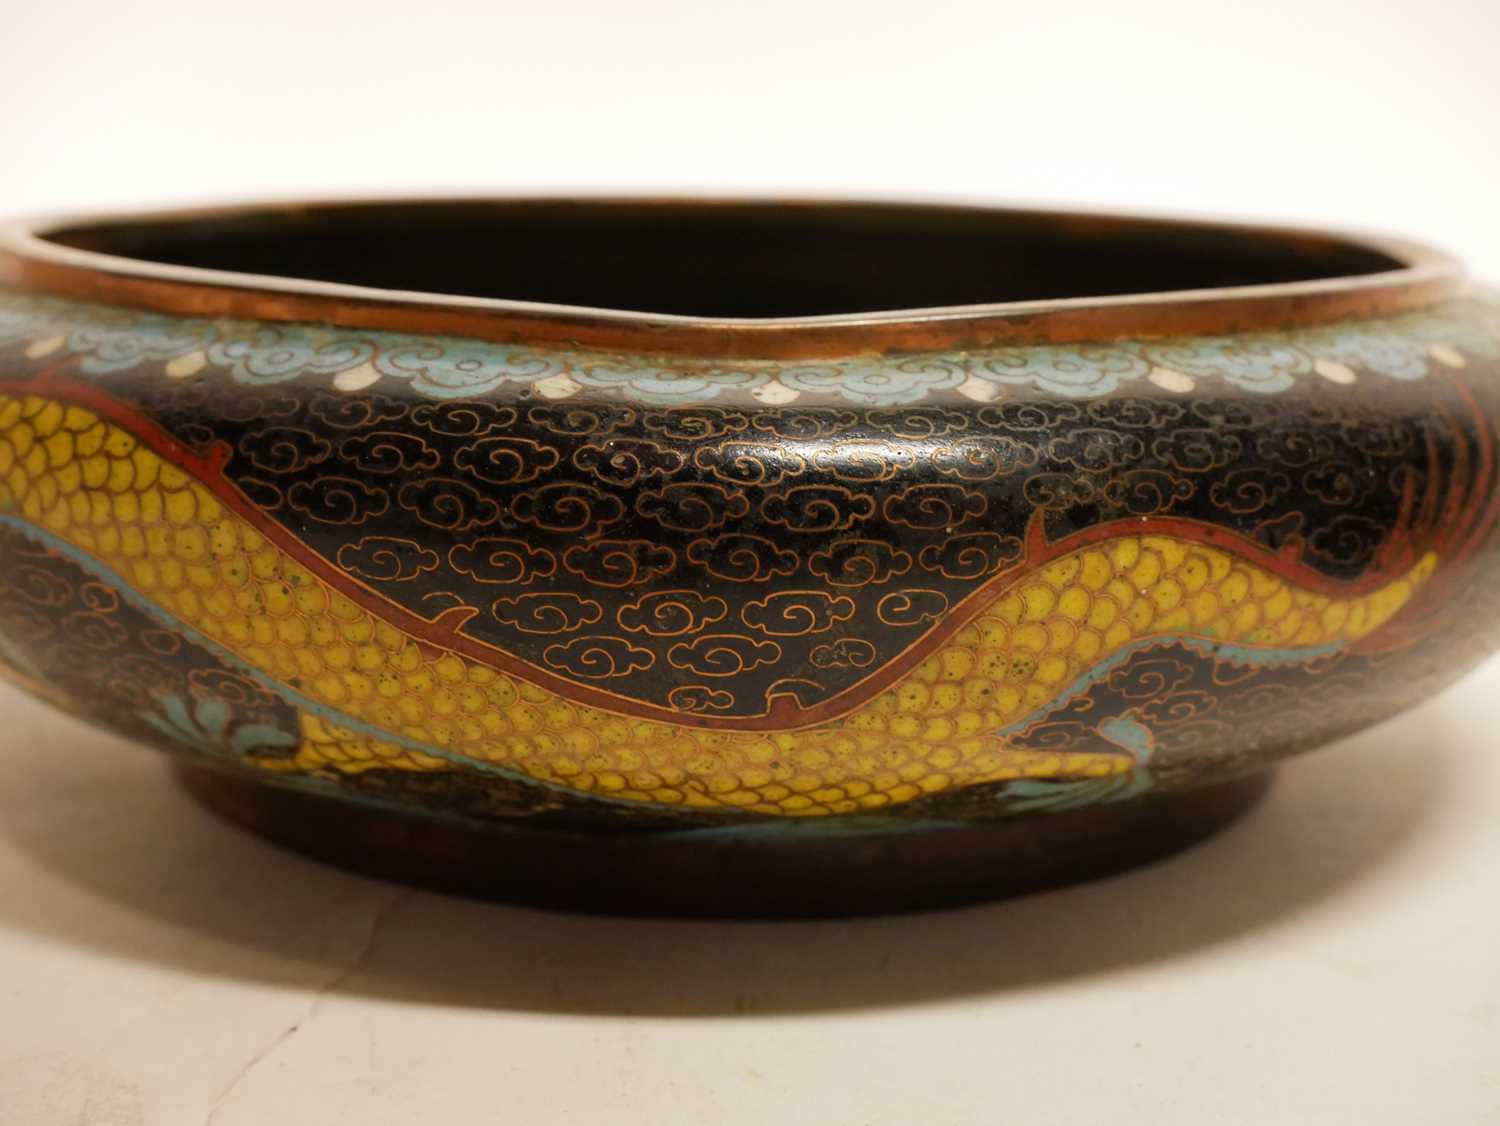 Pair of Chinese Cloisonne Enamel Bowls - Image 8 of 9